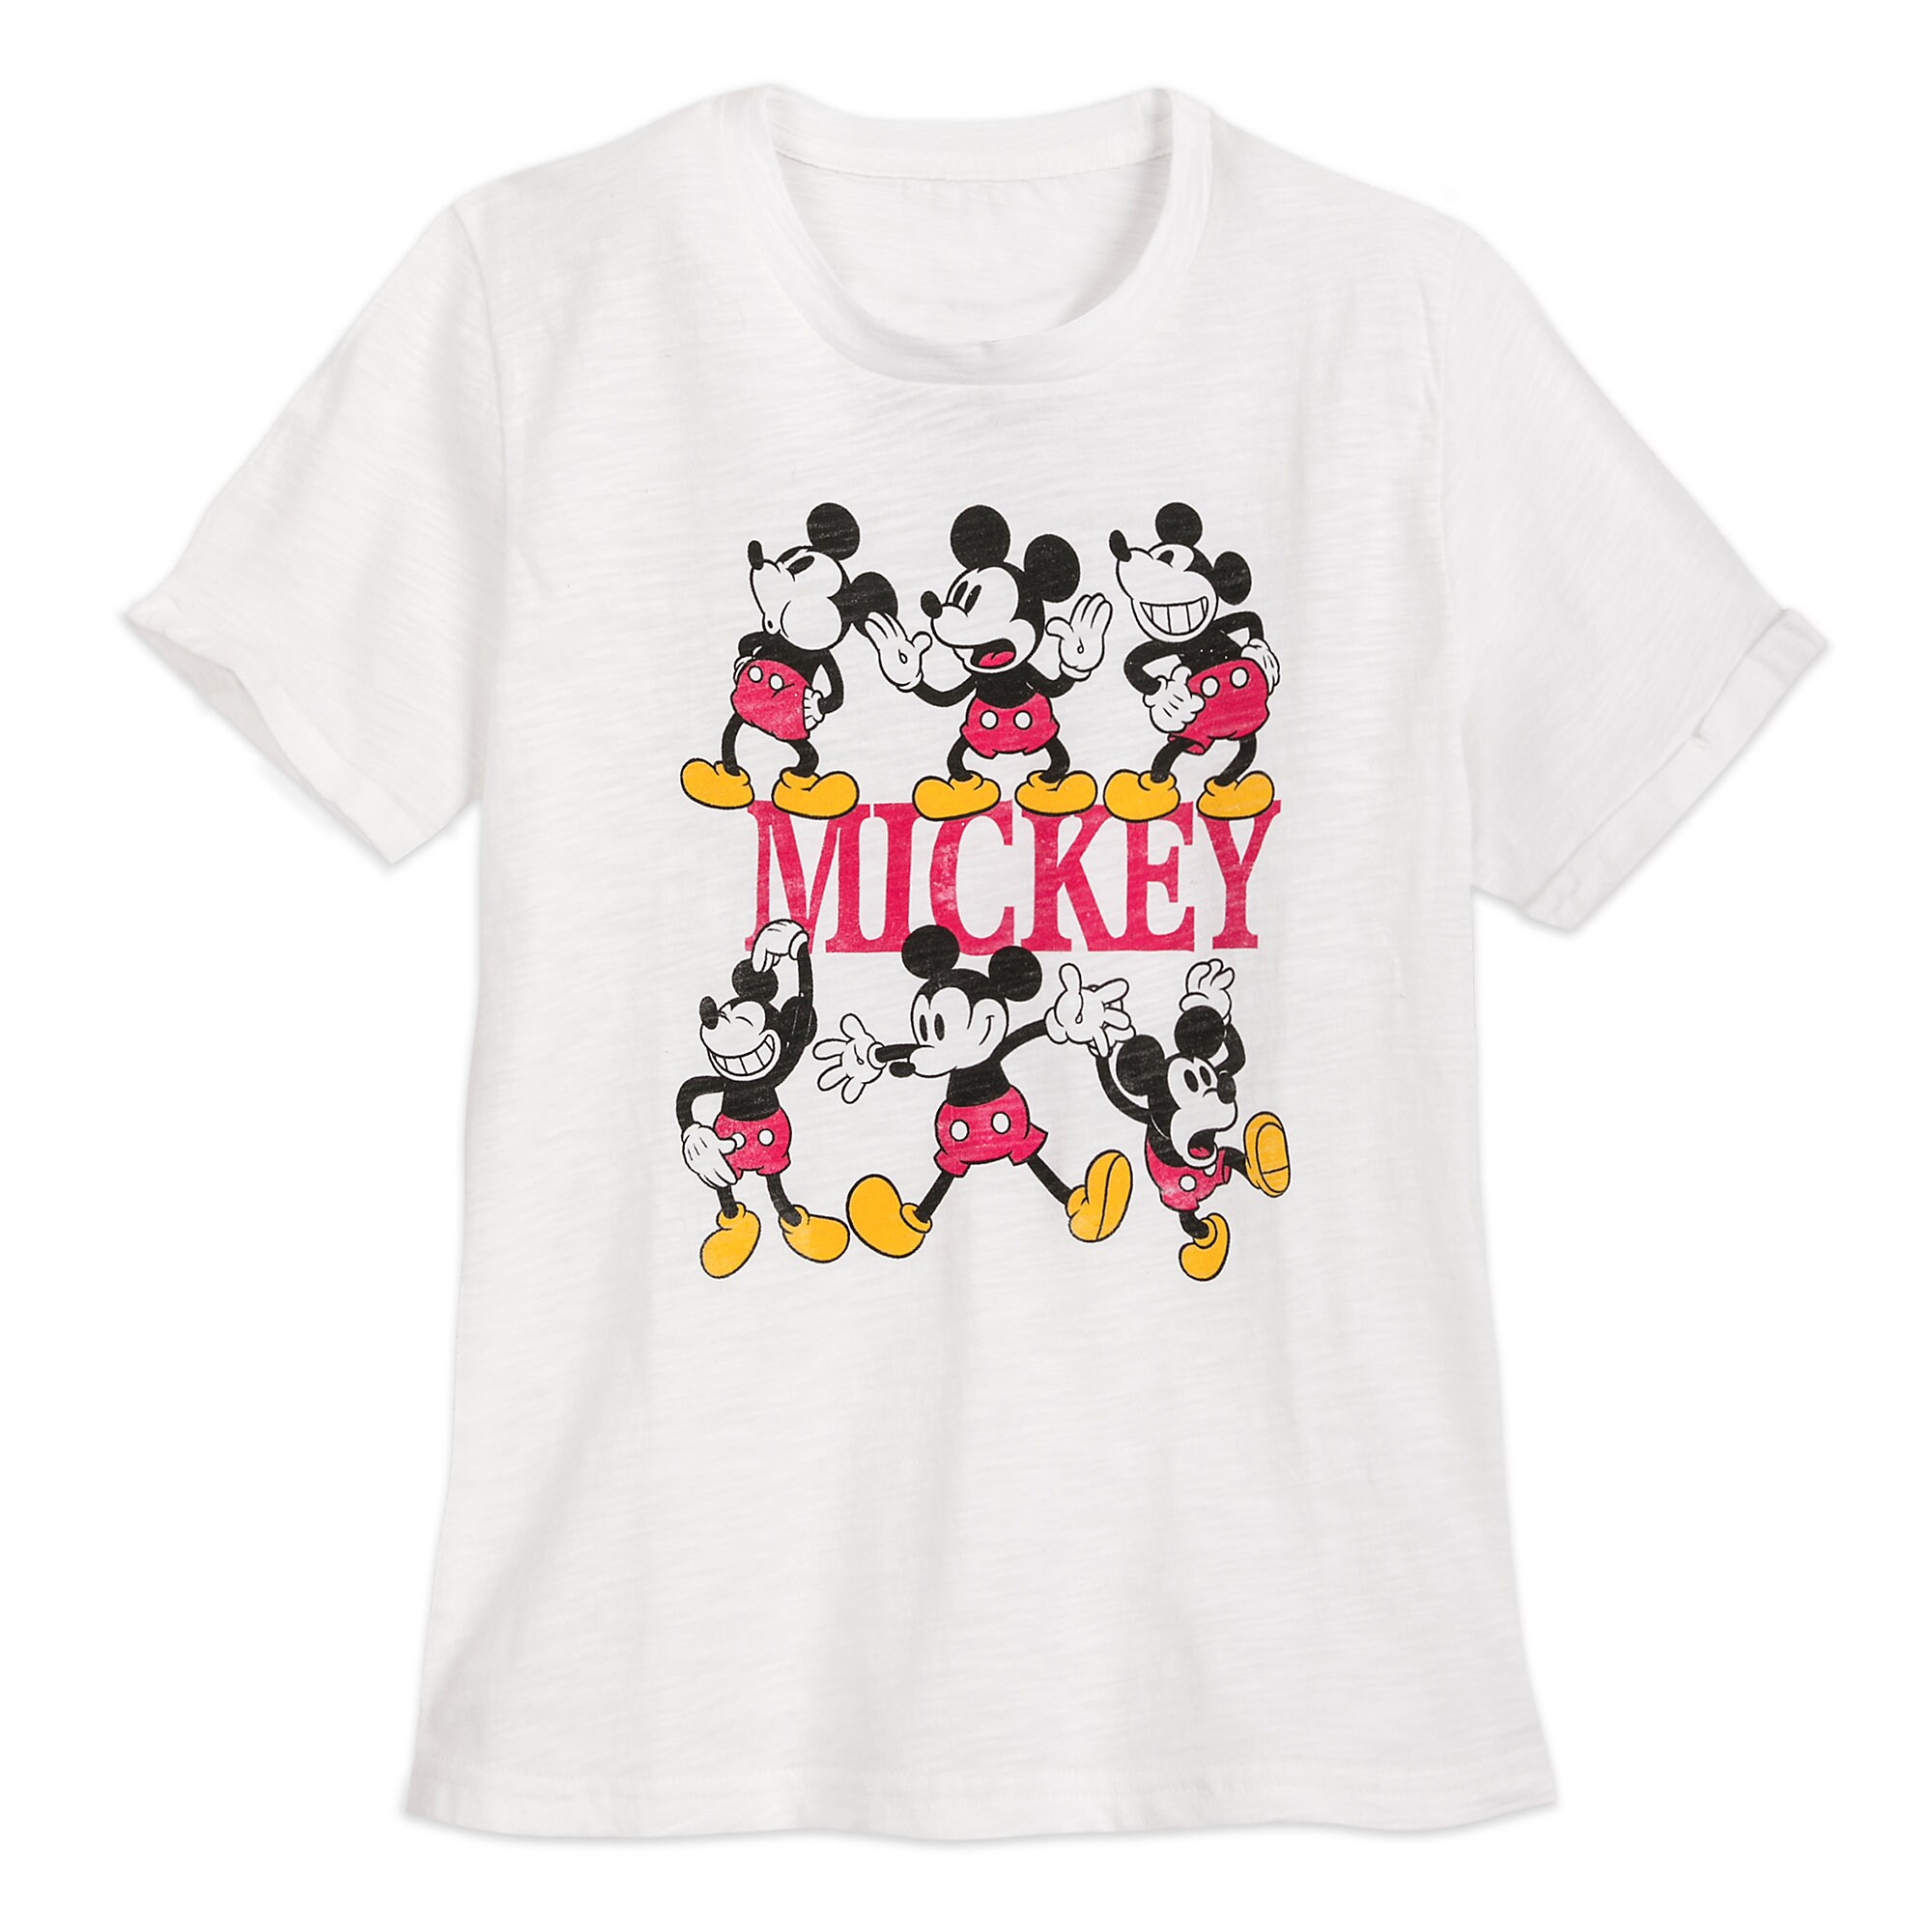 Mickey Mouse Multi-Pose T-Shirt for Women